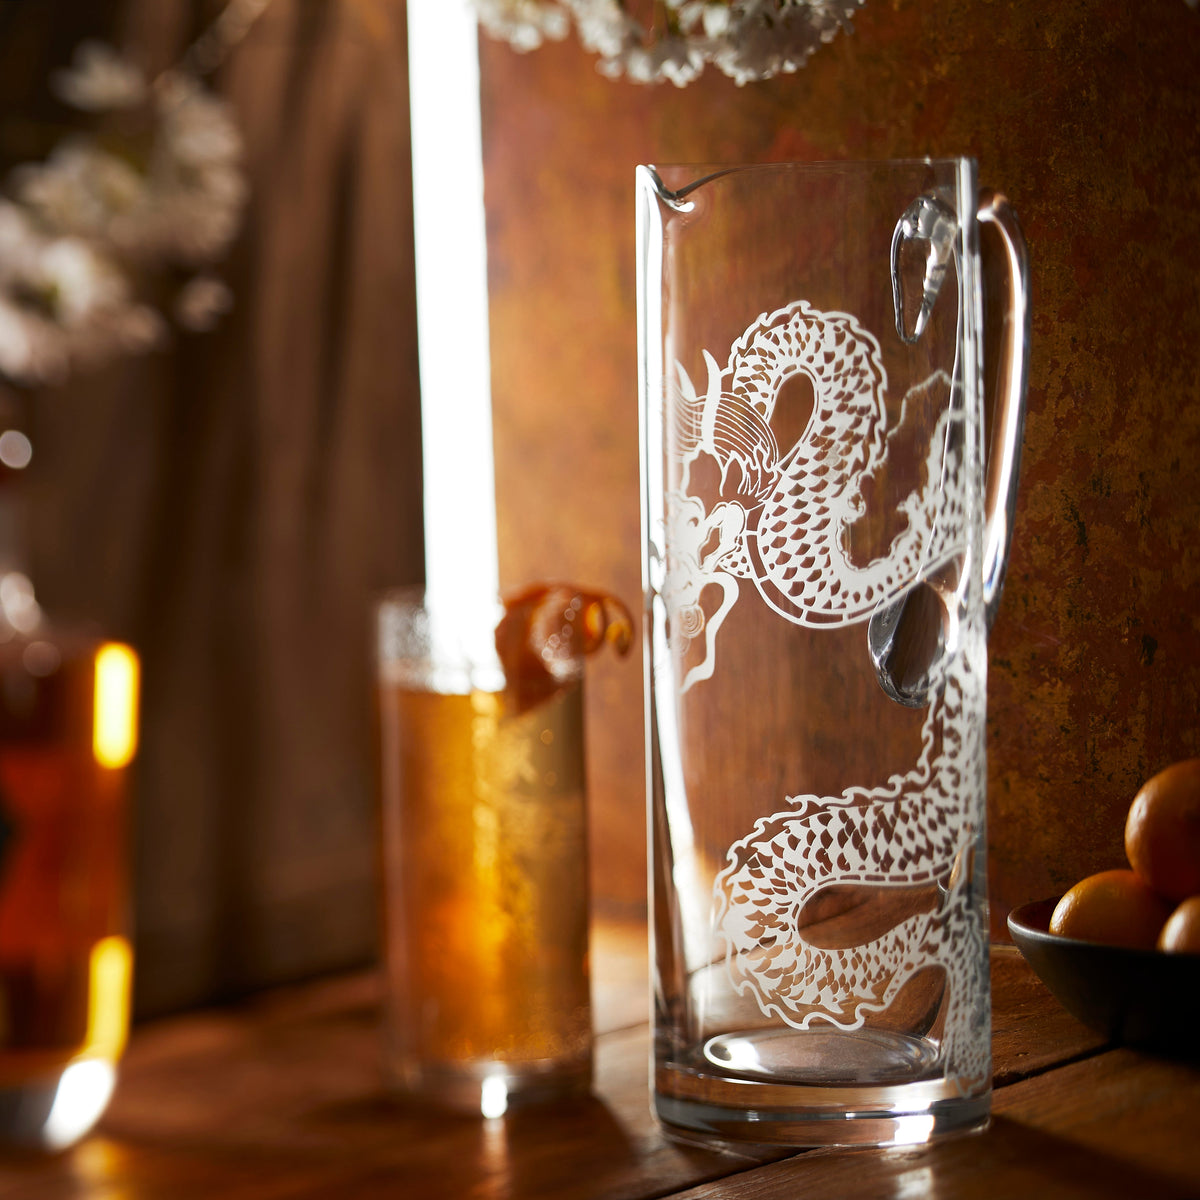 The sand etched dragon pitcher by Caskata is displayed on a moody warm tabletop with  coordinating tall drinking glass.